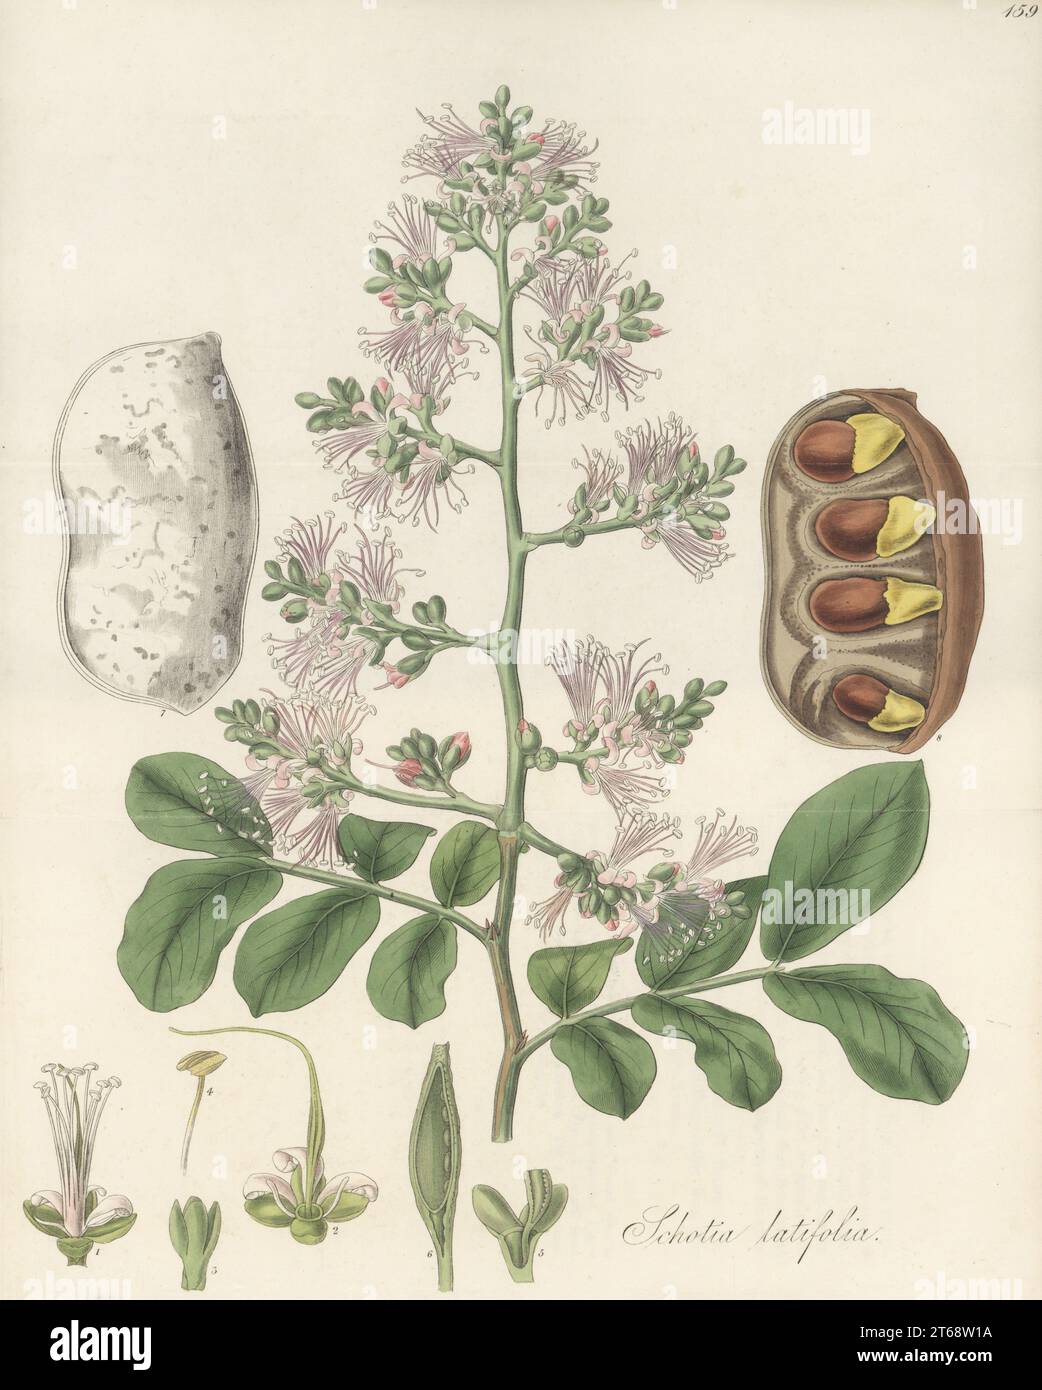 Forest boer-bean or broad-leaved schotia, Schotia latifolia. Native to Africa, sent from South Africa by William John Burchell to Scottish botanist John Hope at Edinburgh Botanic Garden. Seeds are edible when roasted. Handcoloured copperplate engraving by Joseph Swan after a botanical illustration by William Jackson Hooker from his Exotic Flora, William Blackwood, Edinburgh, 1827. Stock Photo